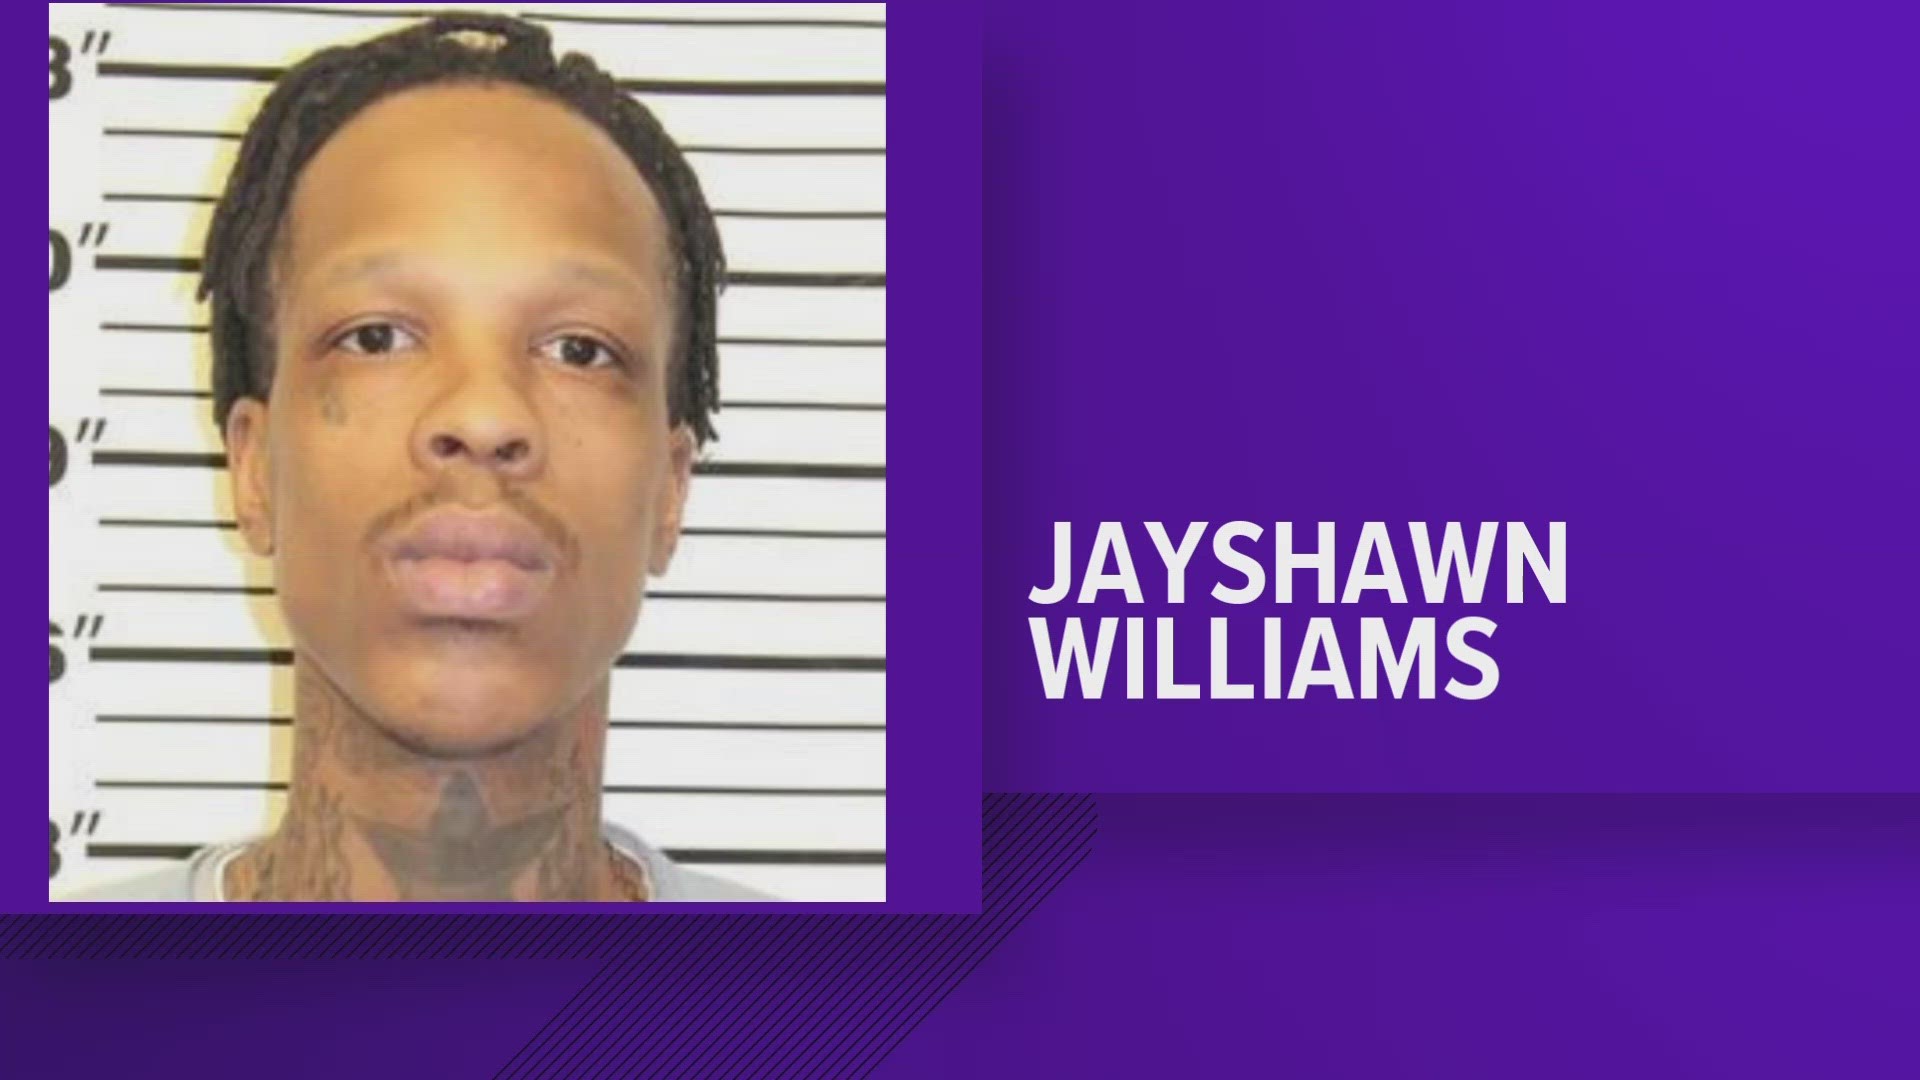 Jayshawn Williams was charged with second-degree murder in the death of Travis Brown, according to Knoxville police.